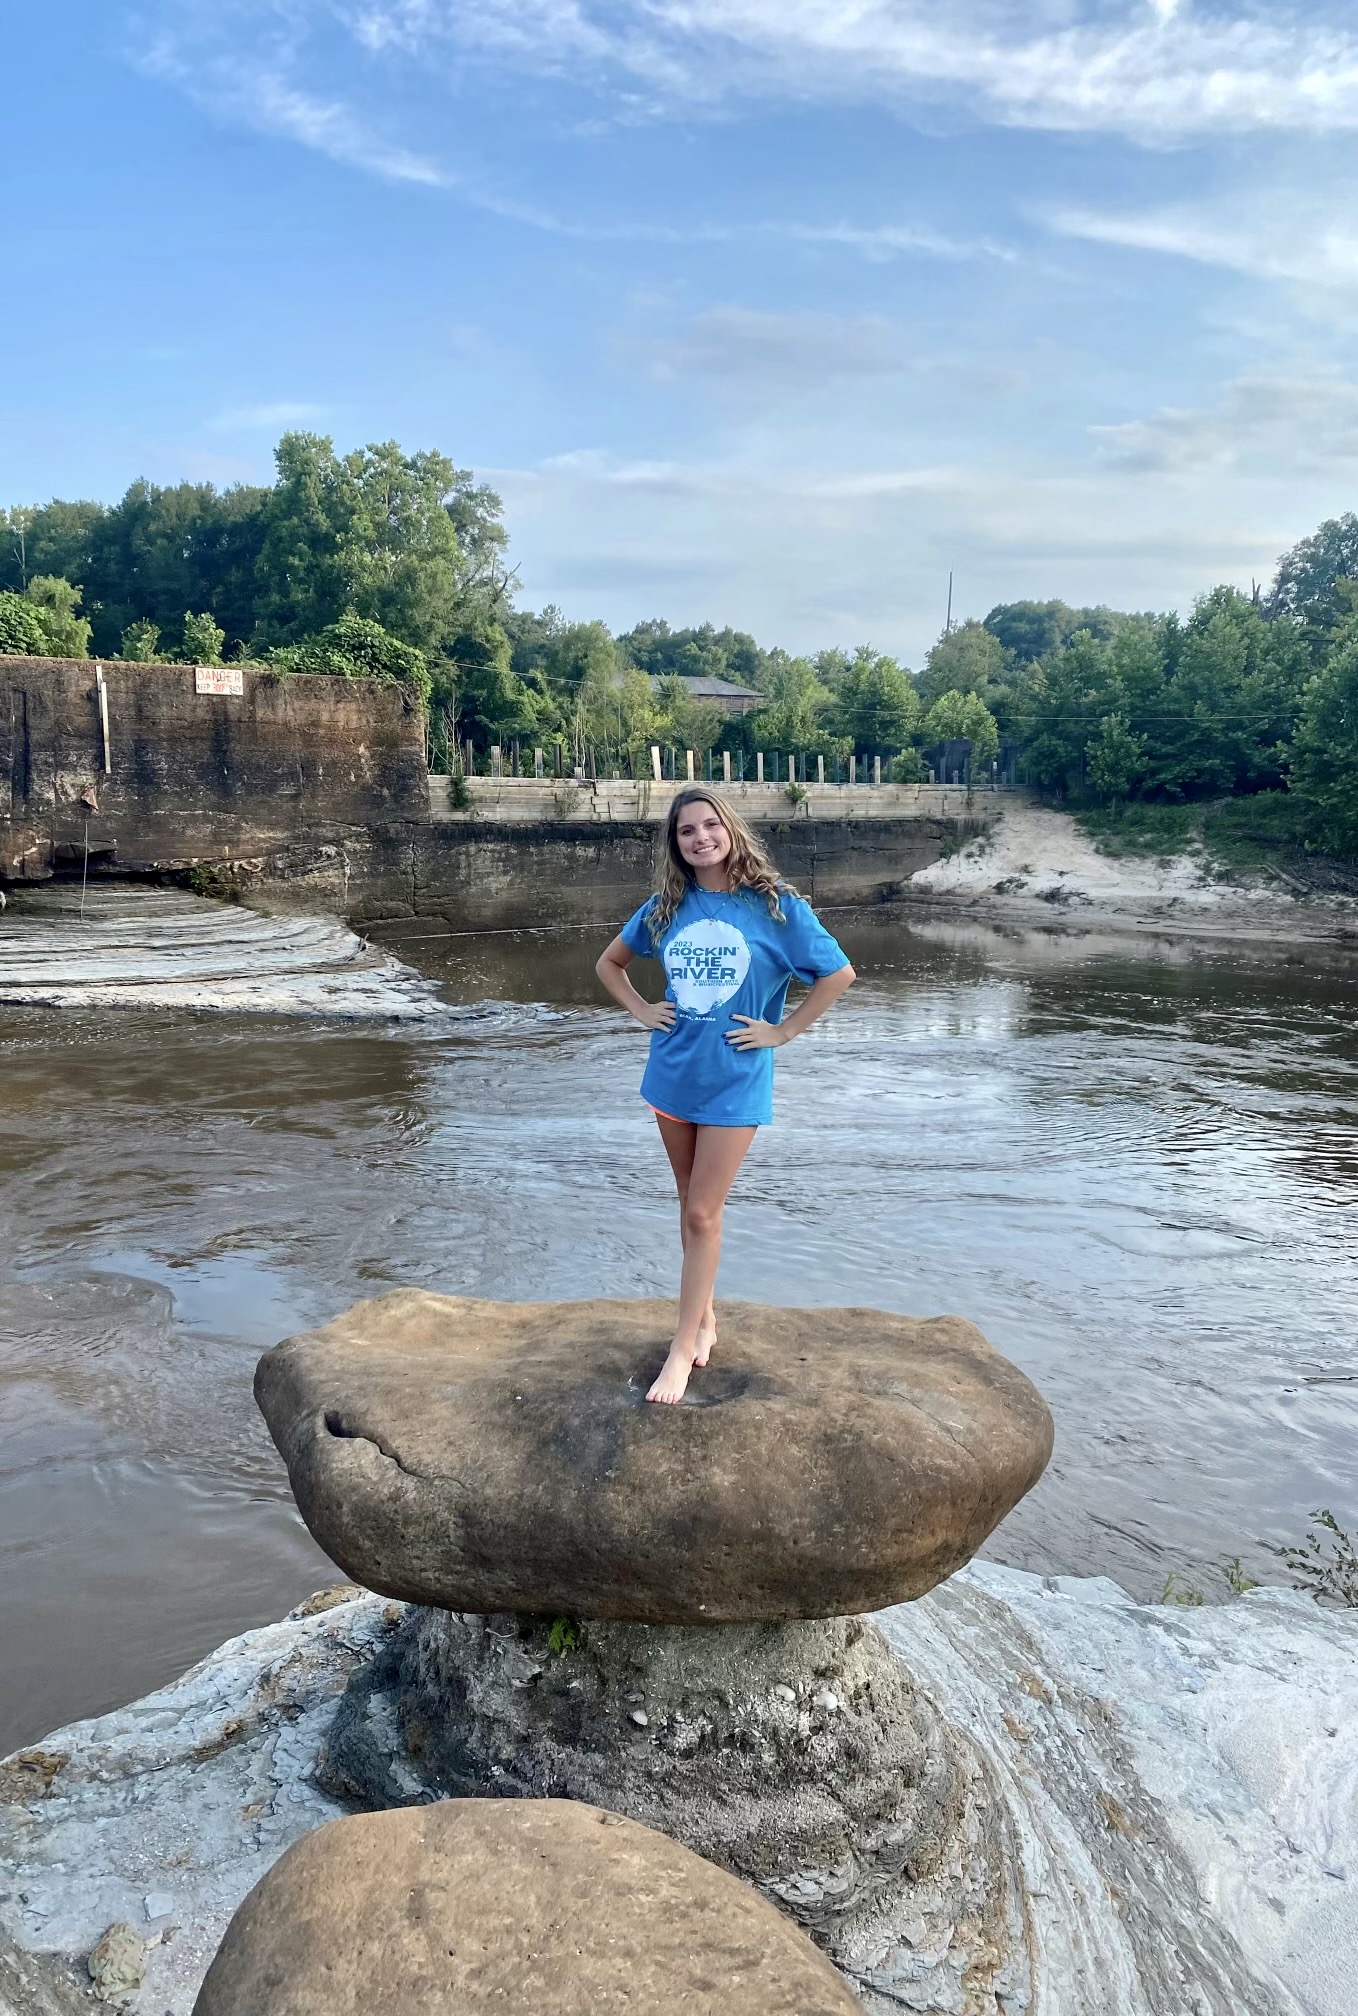 Mikailie Caulder stands on a rock in front of the Elba Dam